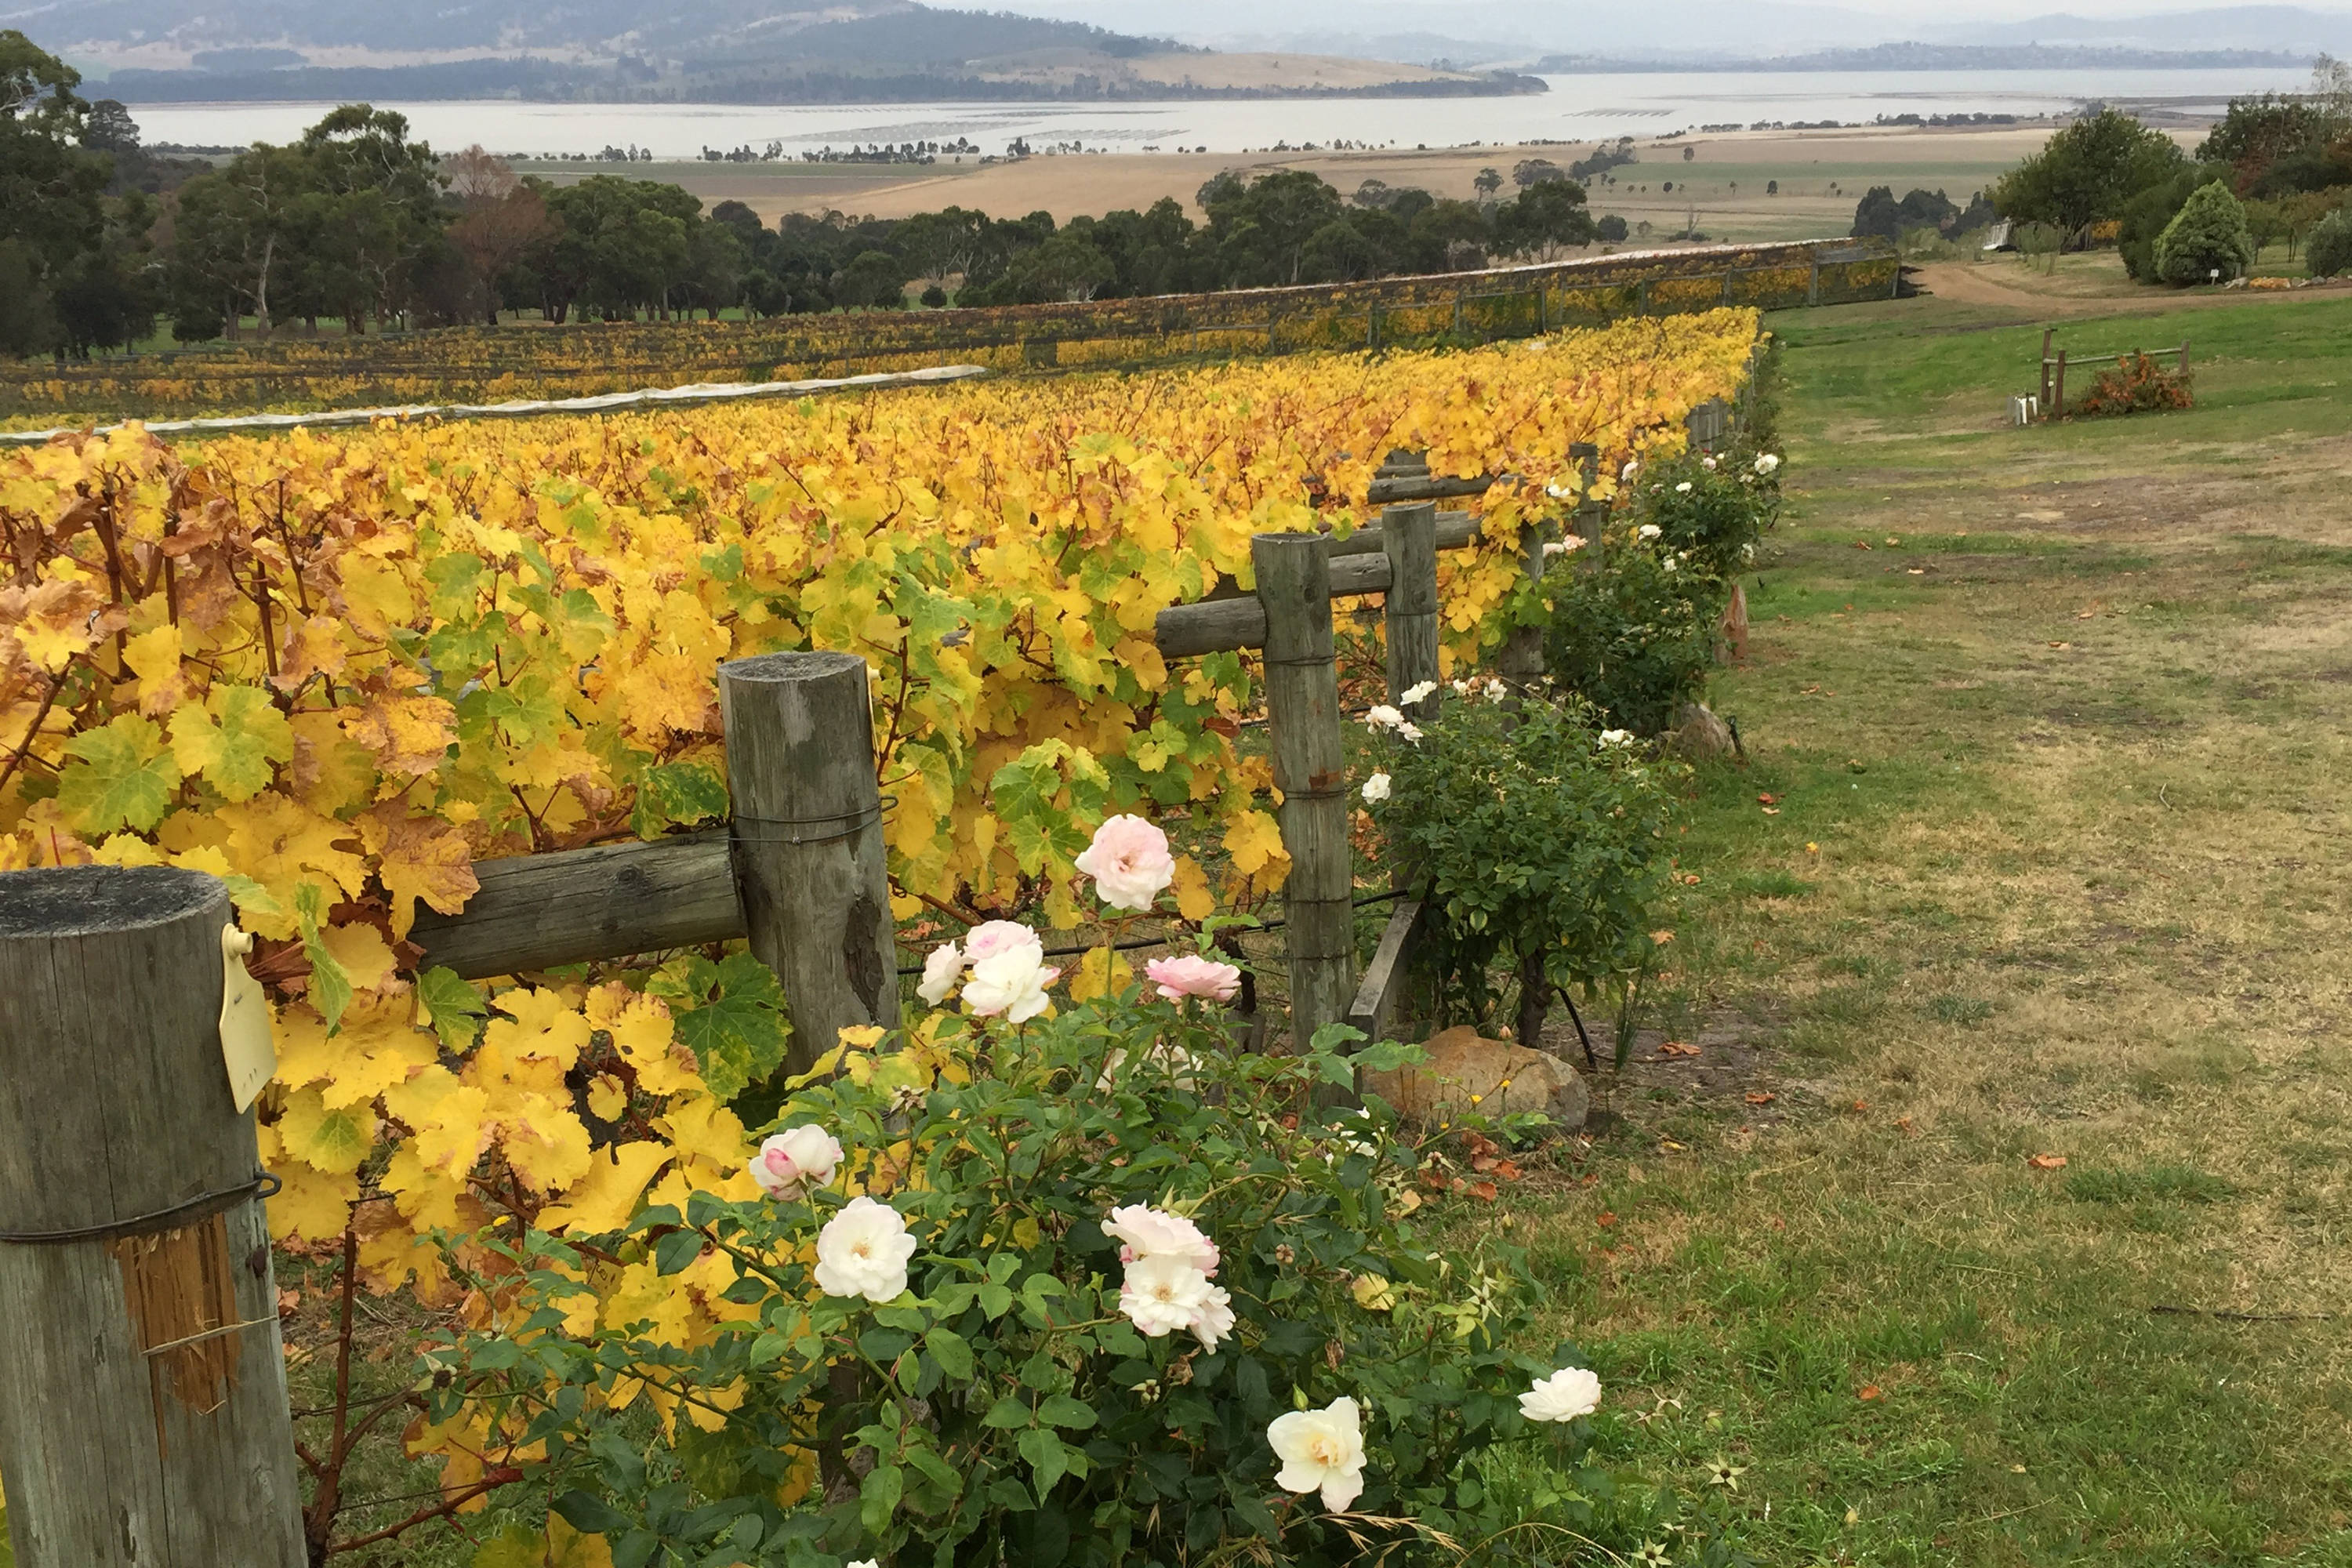 View from Coal Valley Vineyard looking towards Barilla Bay. The vines have yellow leaves and there are pink and white roses planted along the edge of the field of grape vines.